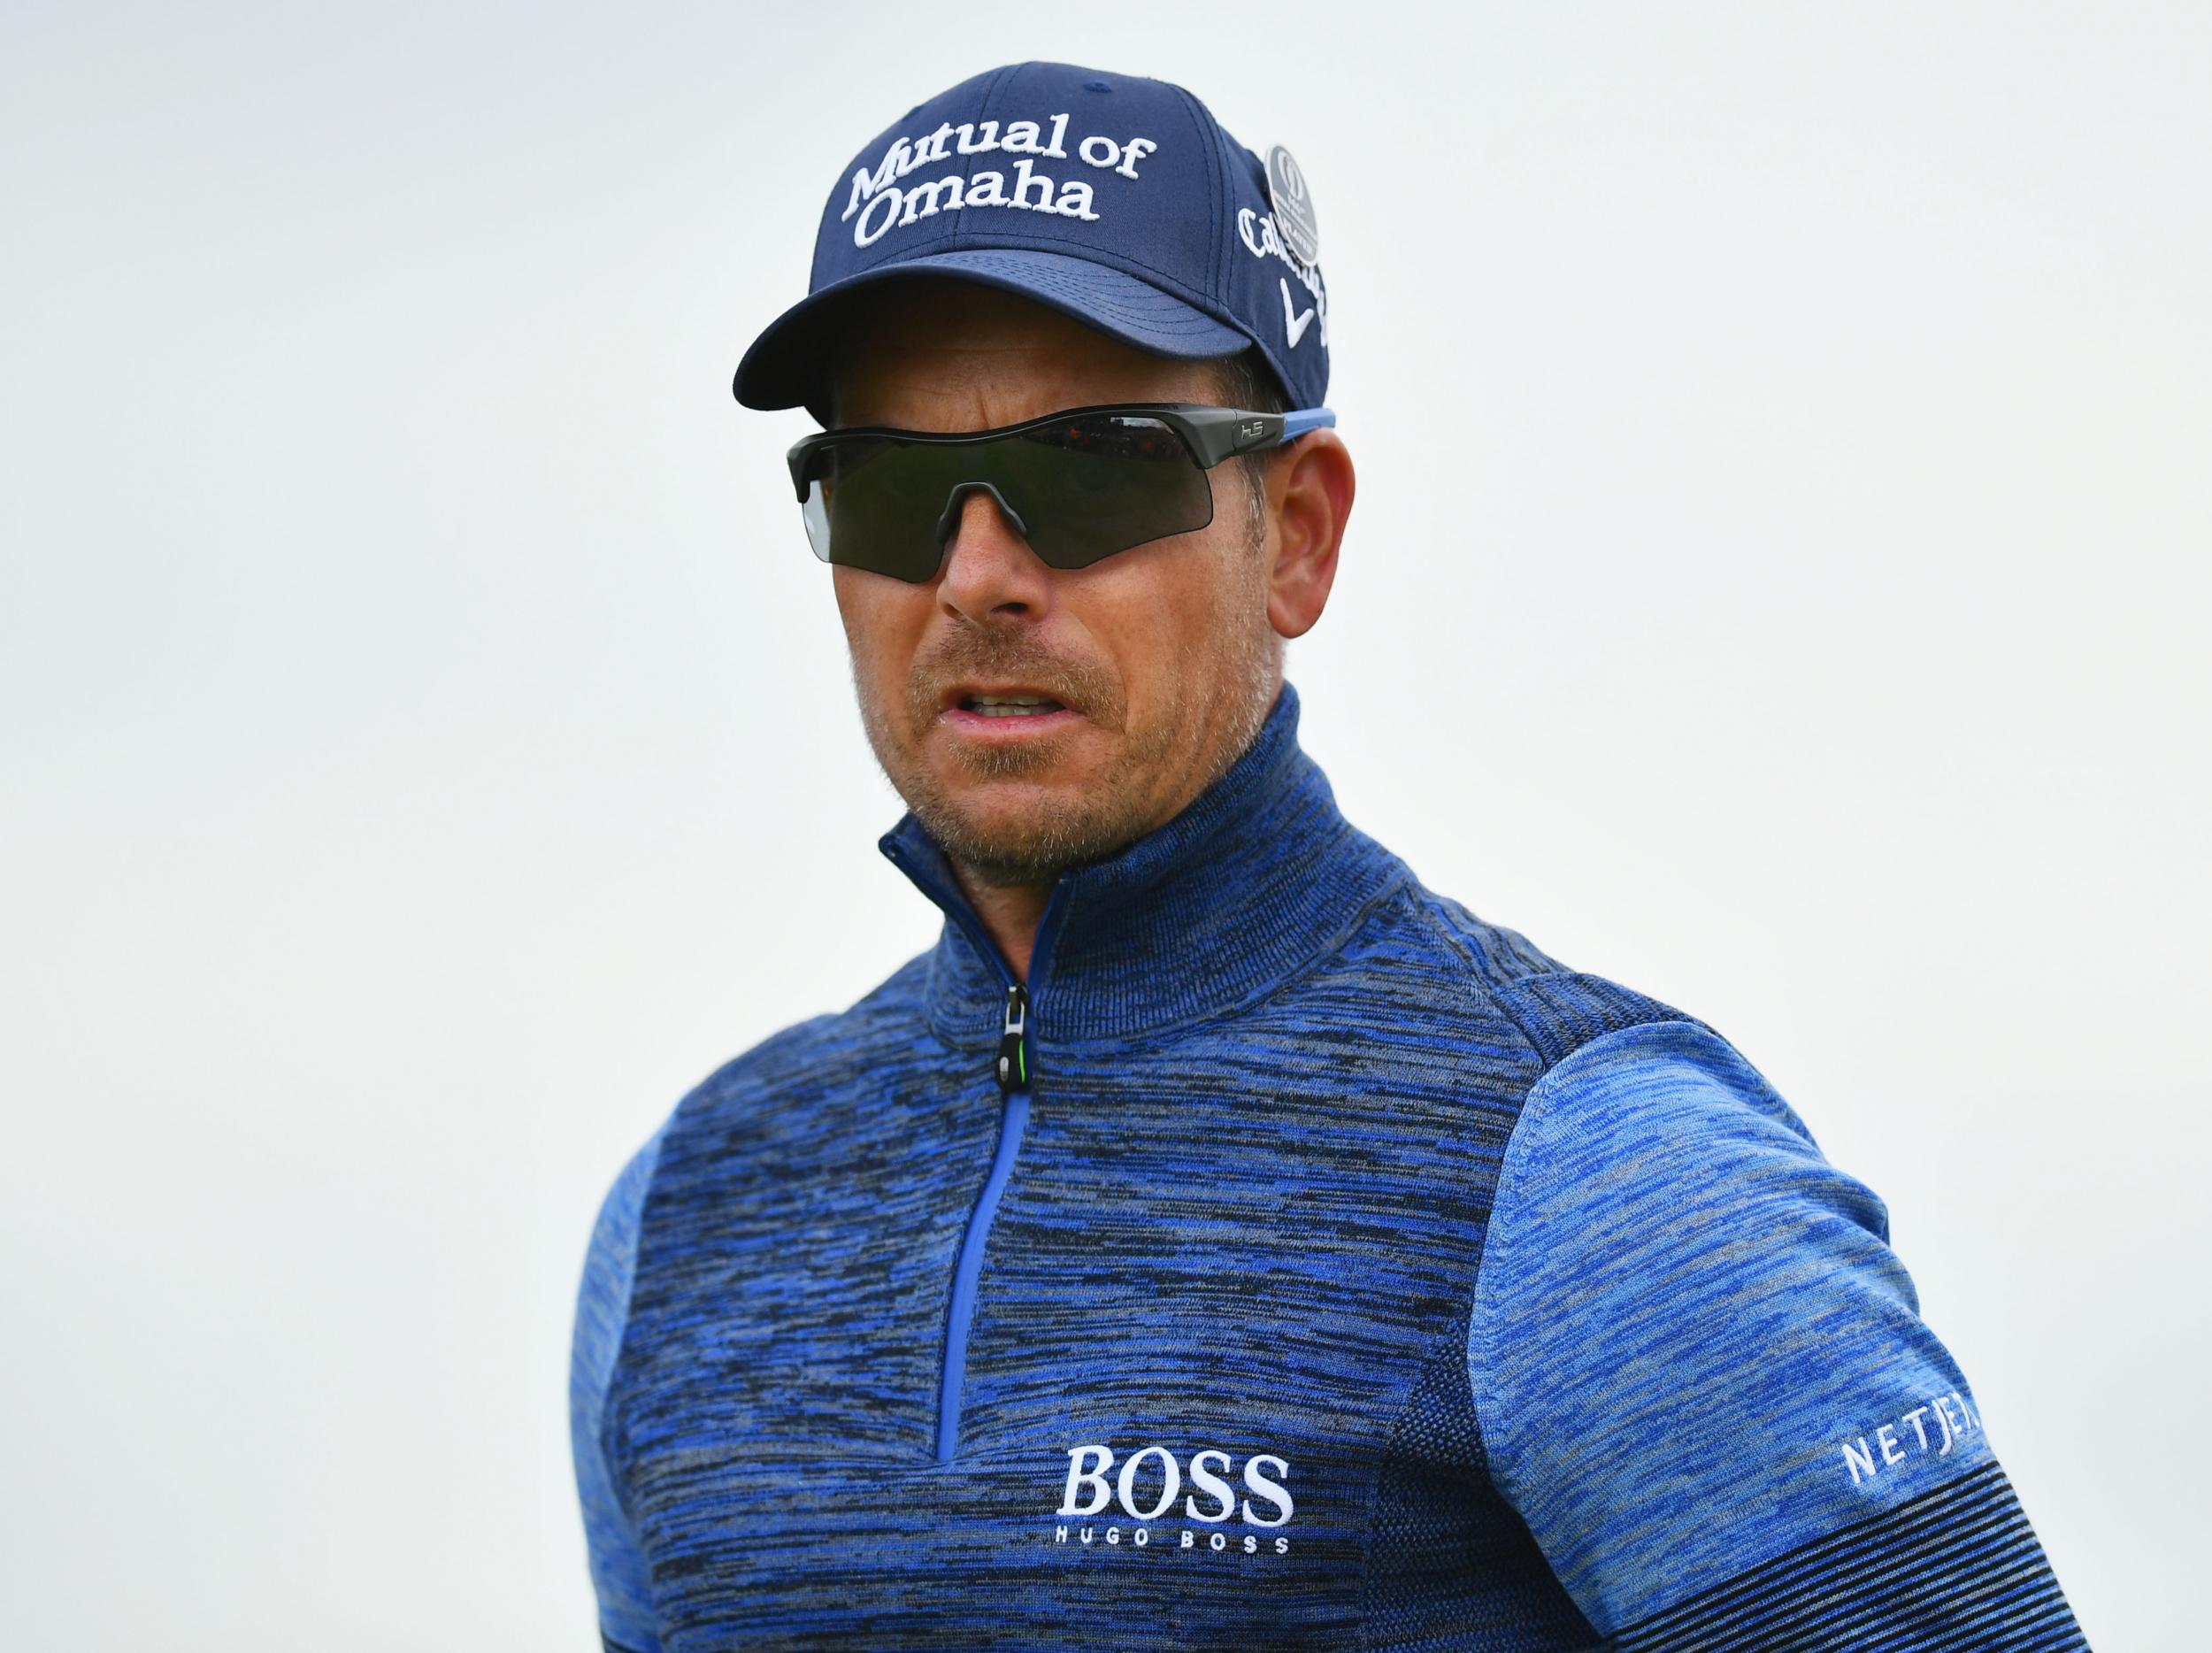 Stenson is the defending Open champion